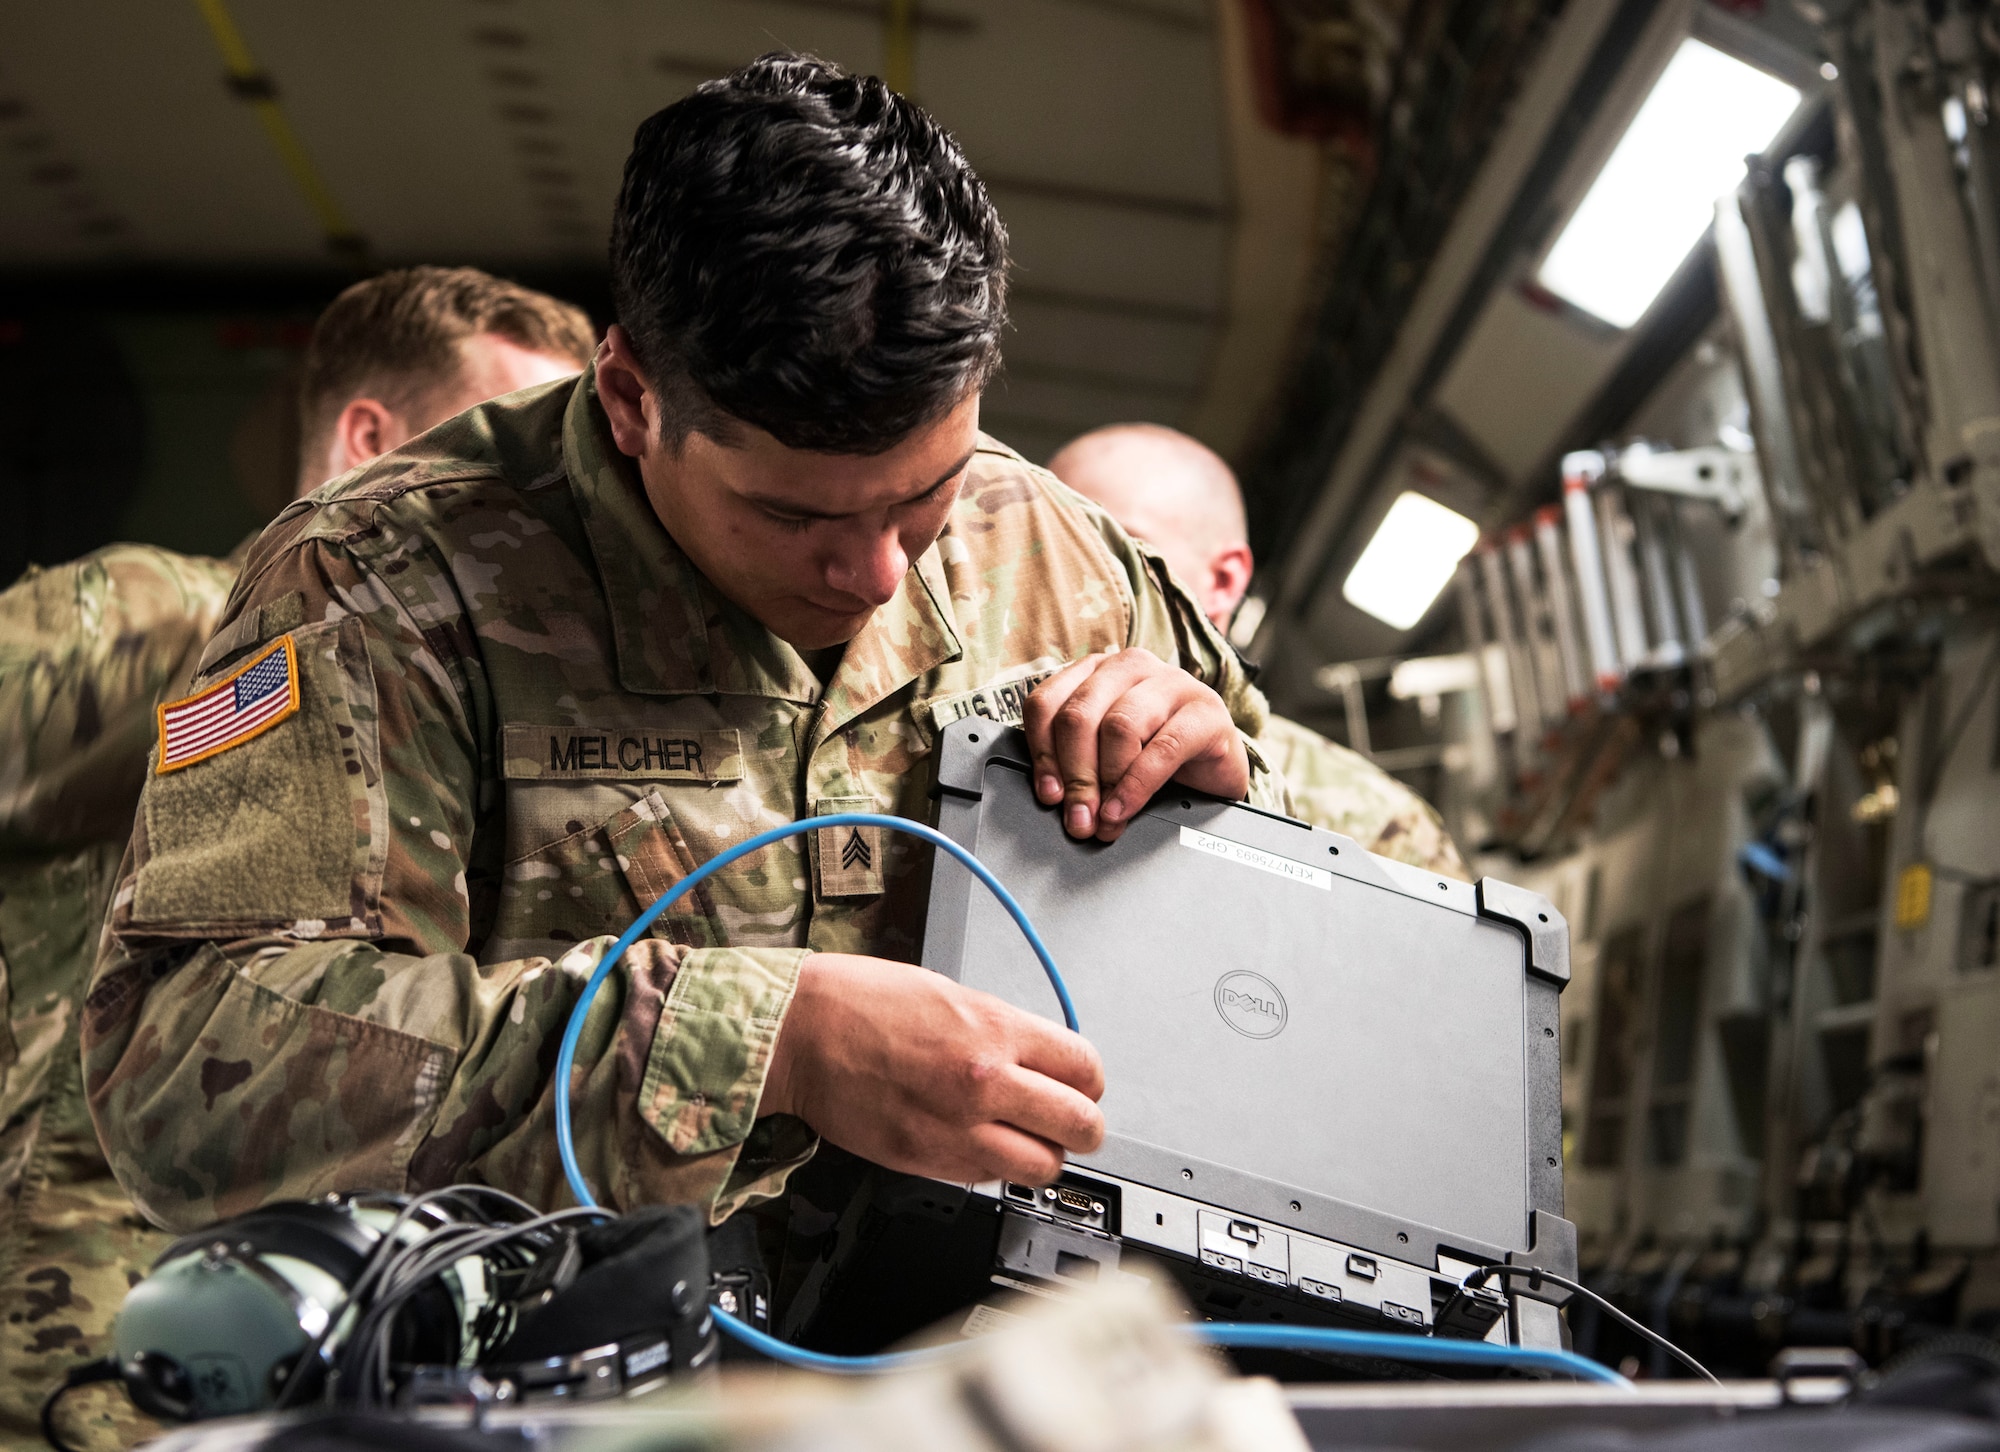 U.S. Army Sgt. Brandon Melcher, a ken operator team chief assigned to the 50th Expeditionary Signal Battalion Enhanced, prepares equipment prior to conducting aerial operations as part of Exercise Dragon Lifeline August 8, 2019, at Joint Base Charleston, S.C. The exercise provided military personnel with experience needed to support rapid deployment operations across air, land, rail and sea. JB Charleston helps to provide rapid global deployment of personnel and equipment to deployed locations across the globe. The annual exercise is just one of the critical readiness exercises the DOD conducts to maintain a lethal and ready force. (U.S. Air Force photo by Staff Sgt. Tenley Long)